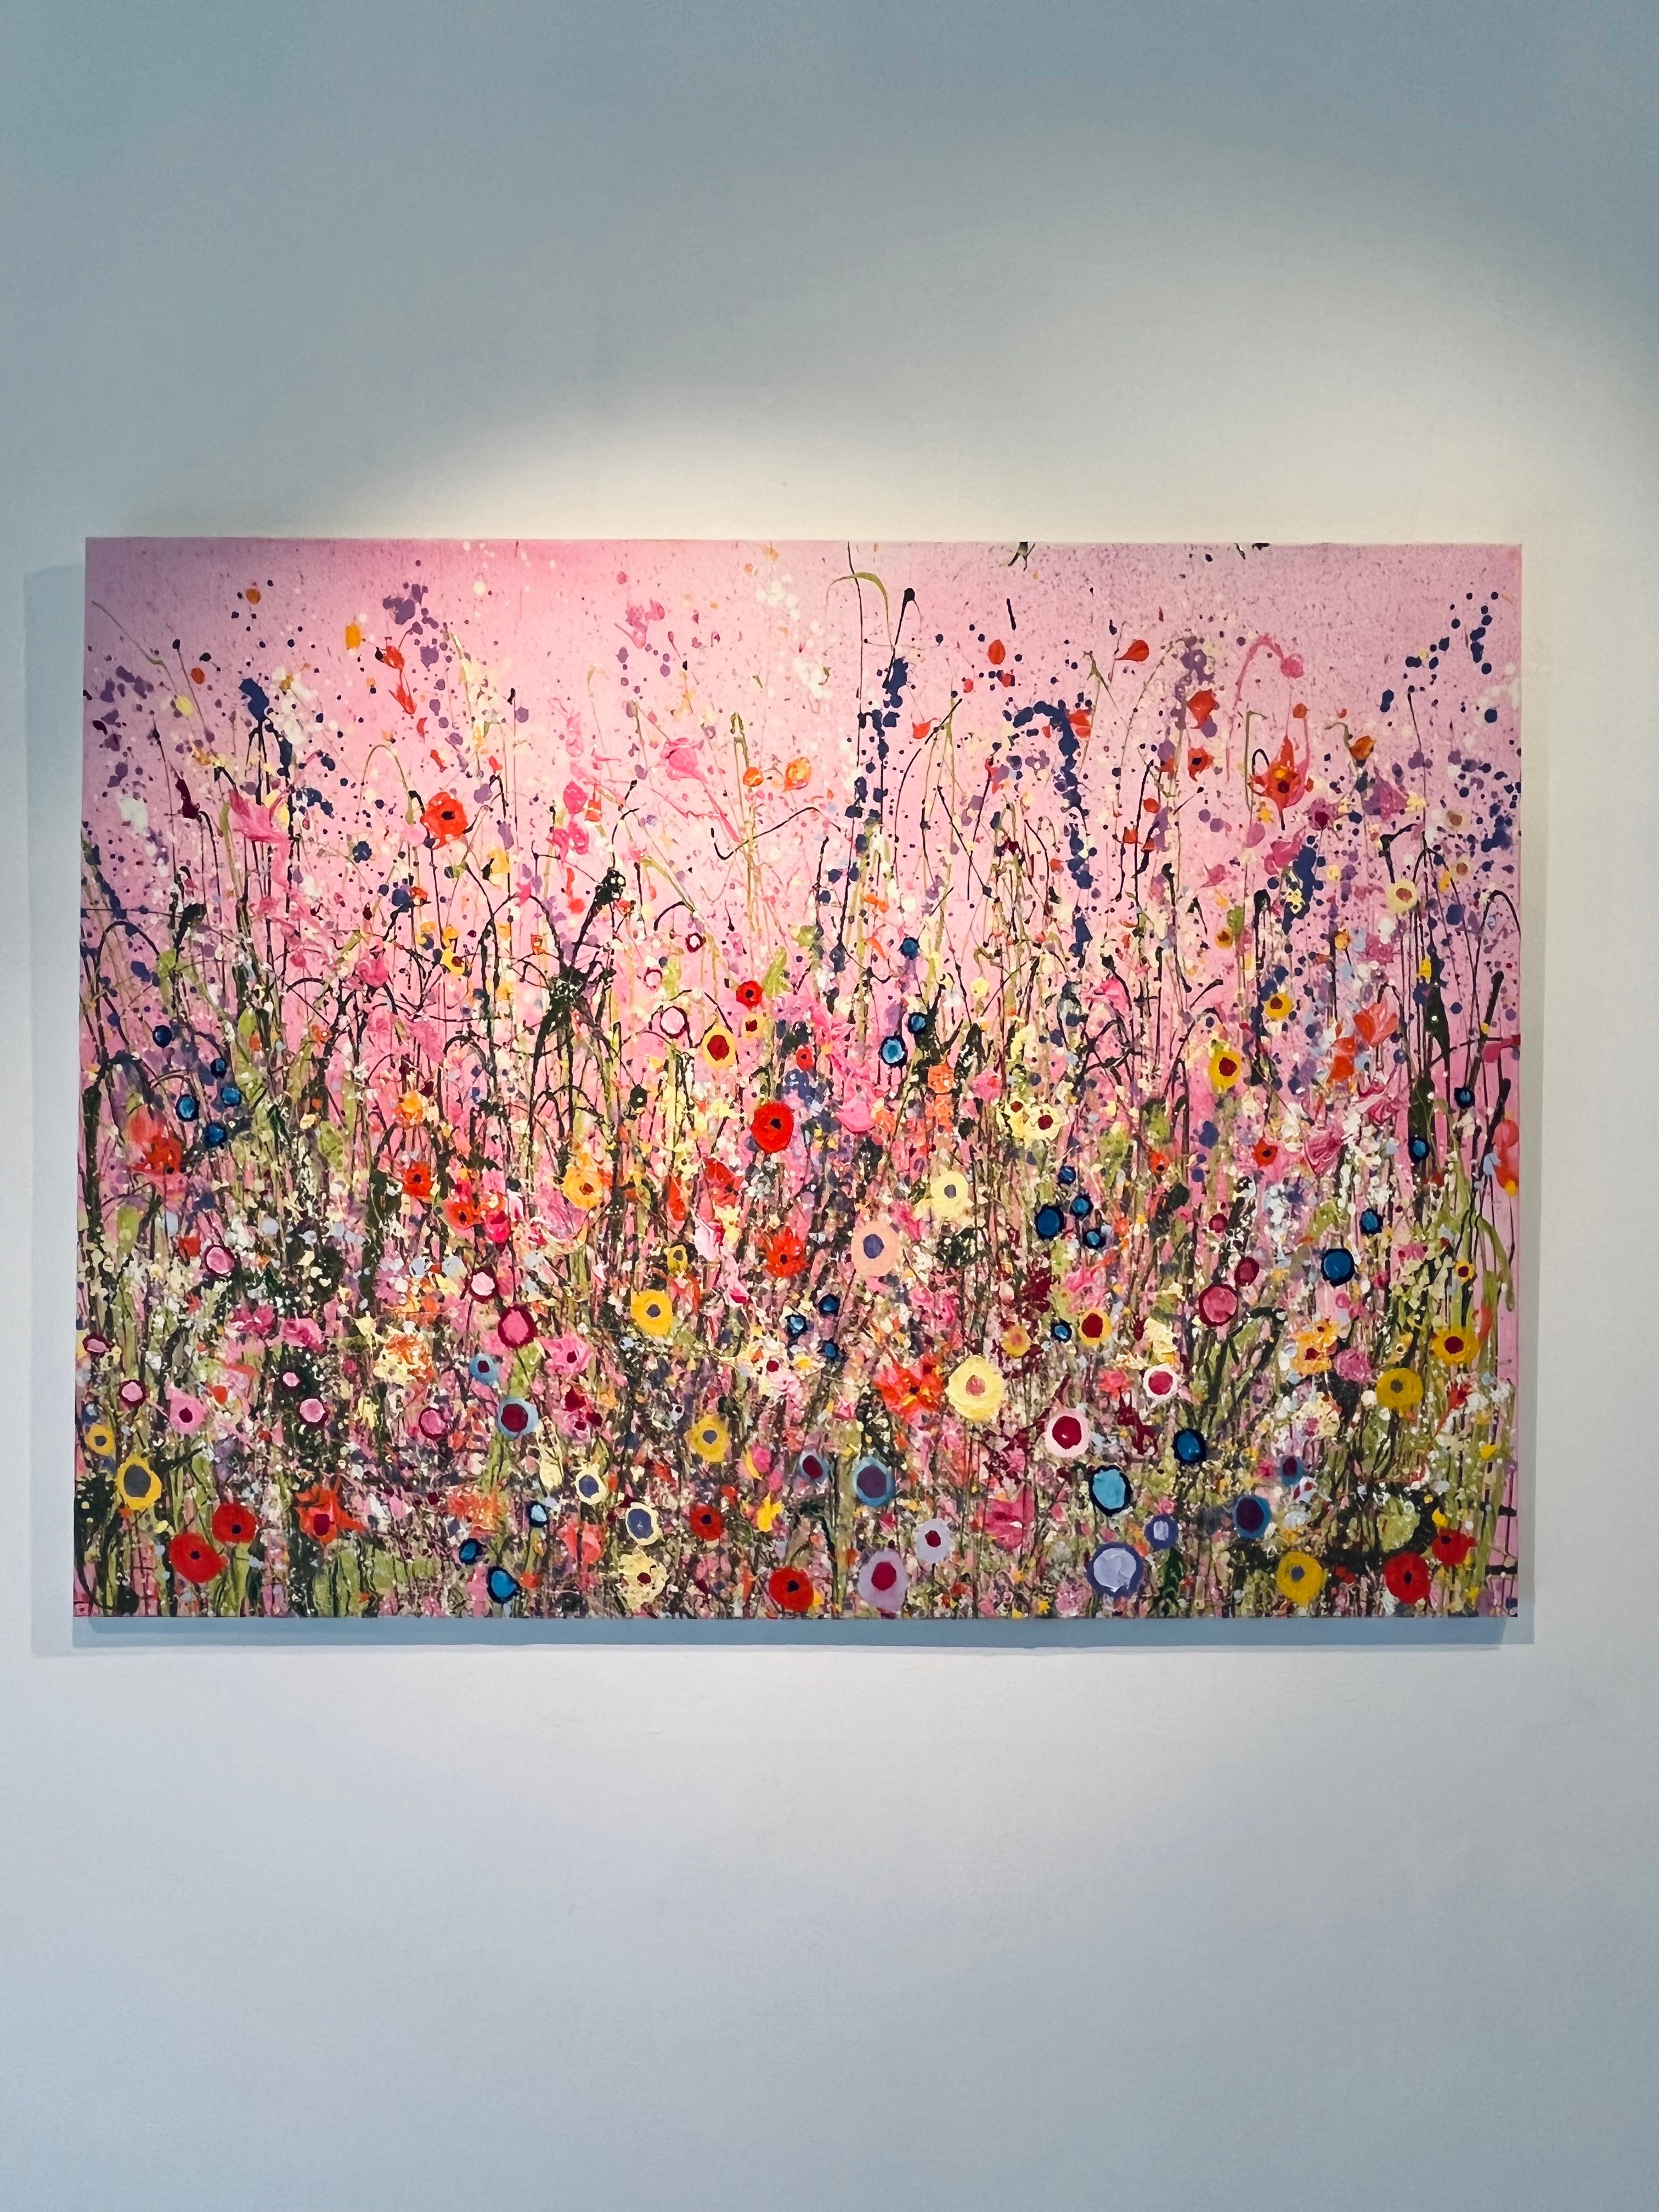 This is Where all the Magic Happens-original floral abstract painting-modern art - Painting by Yvonne Coomber